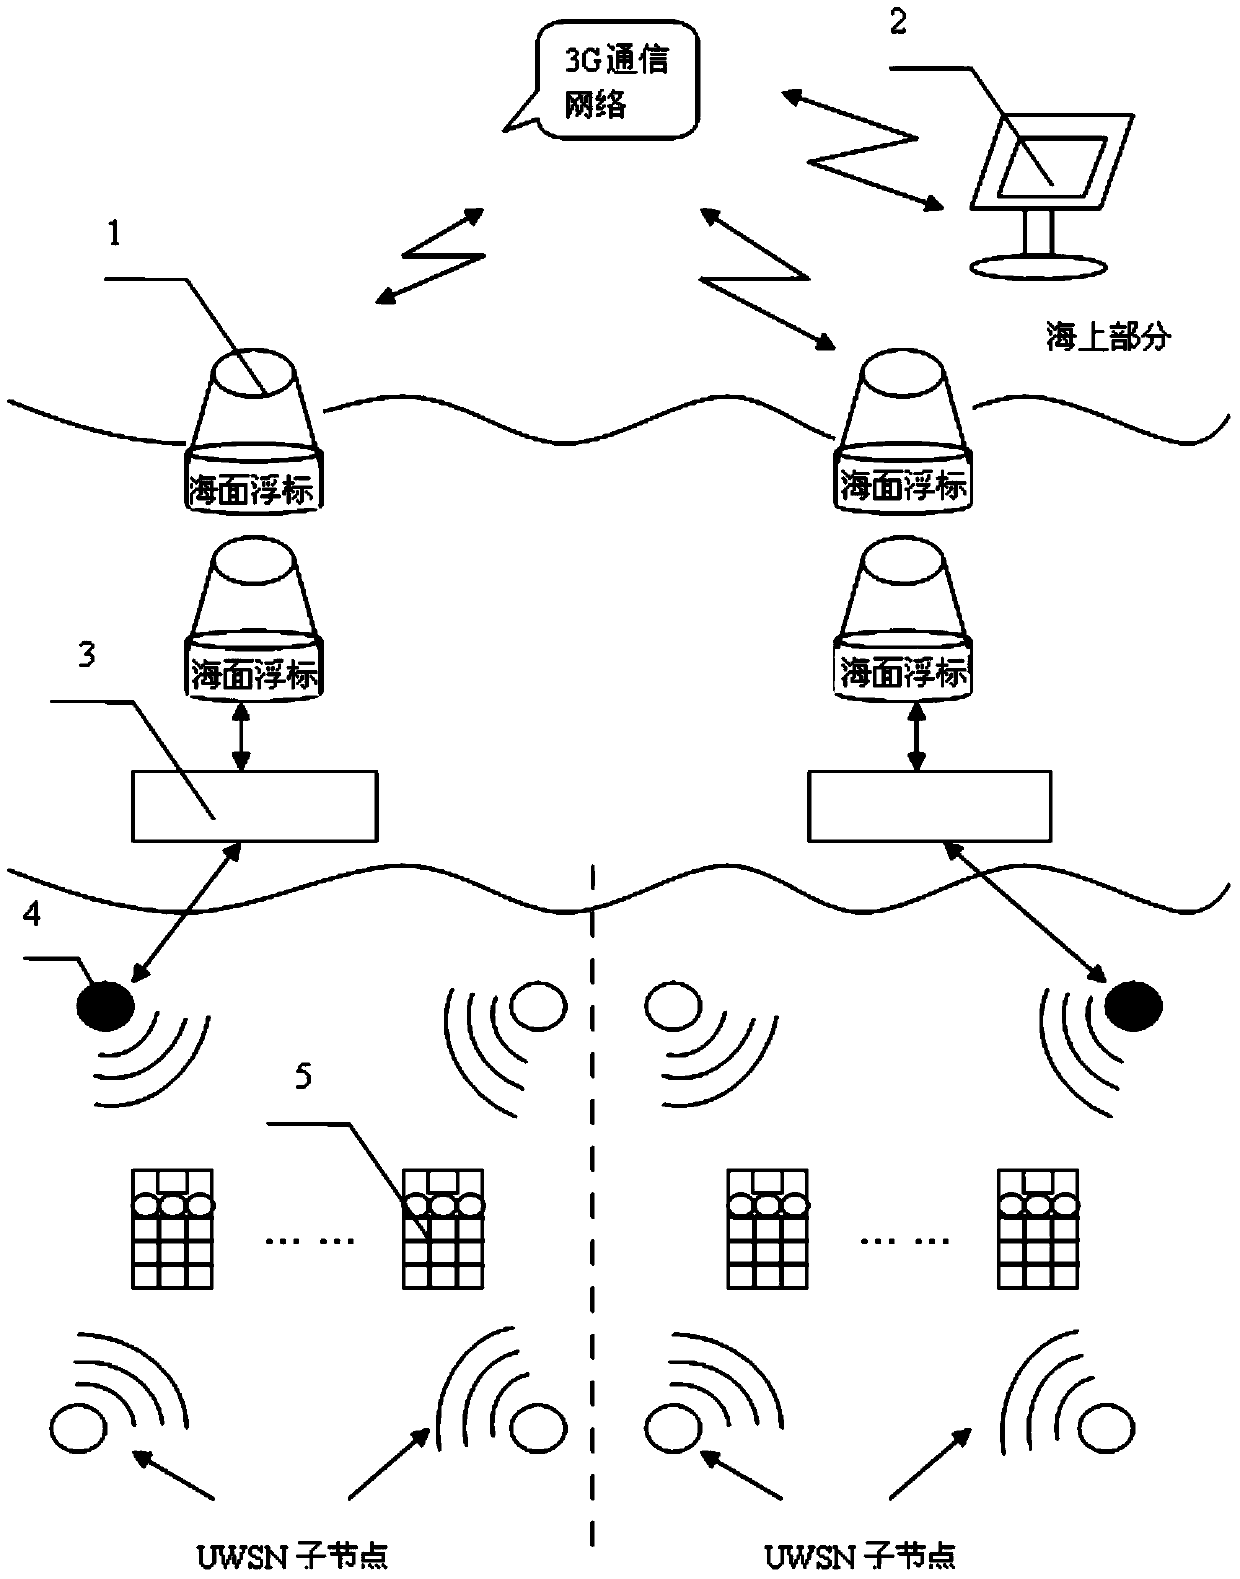 Positioning survival alarm system for bathing beach personnel